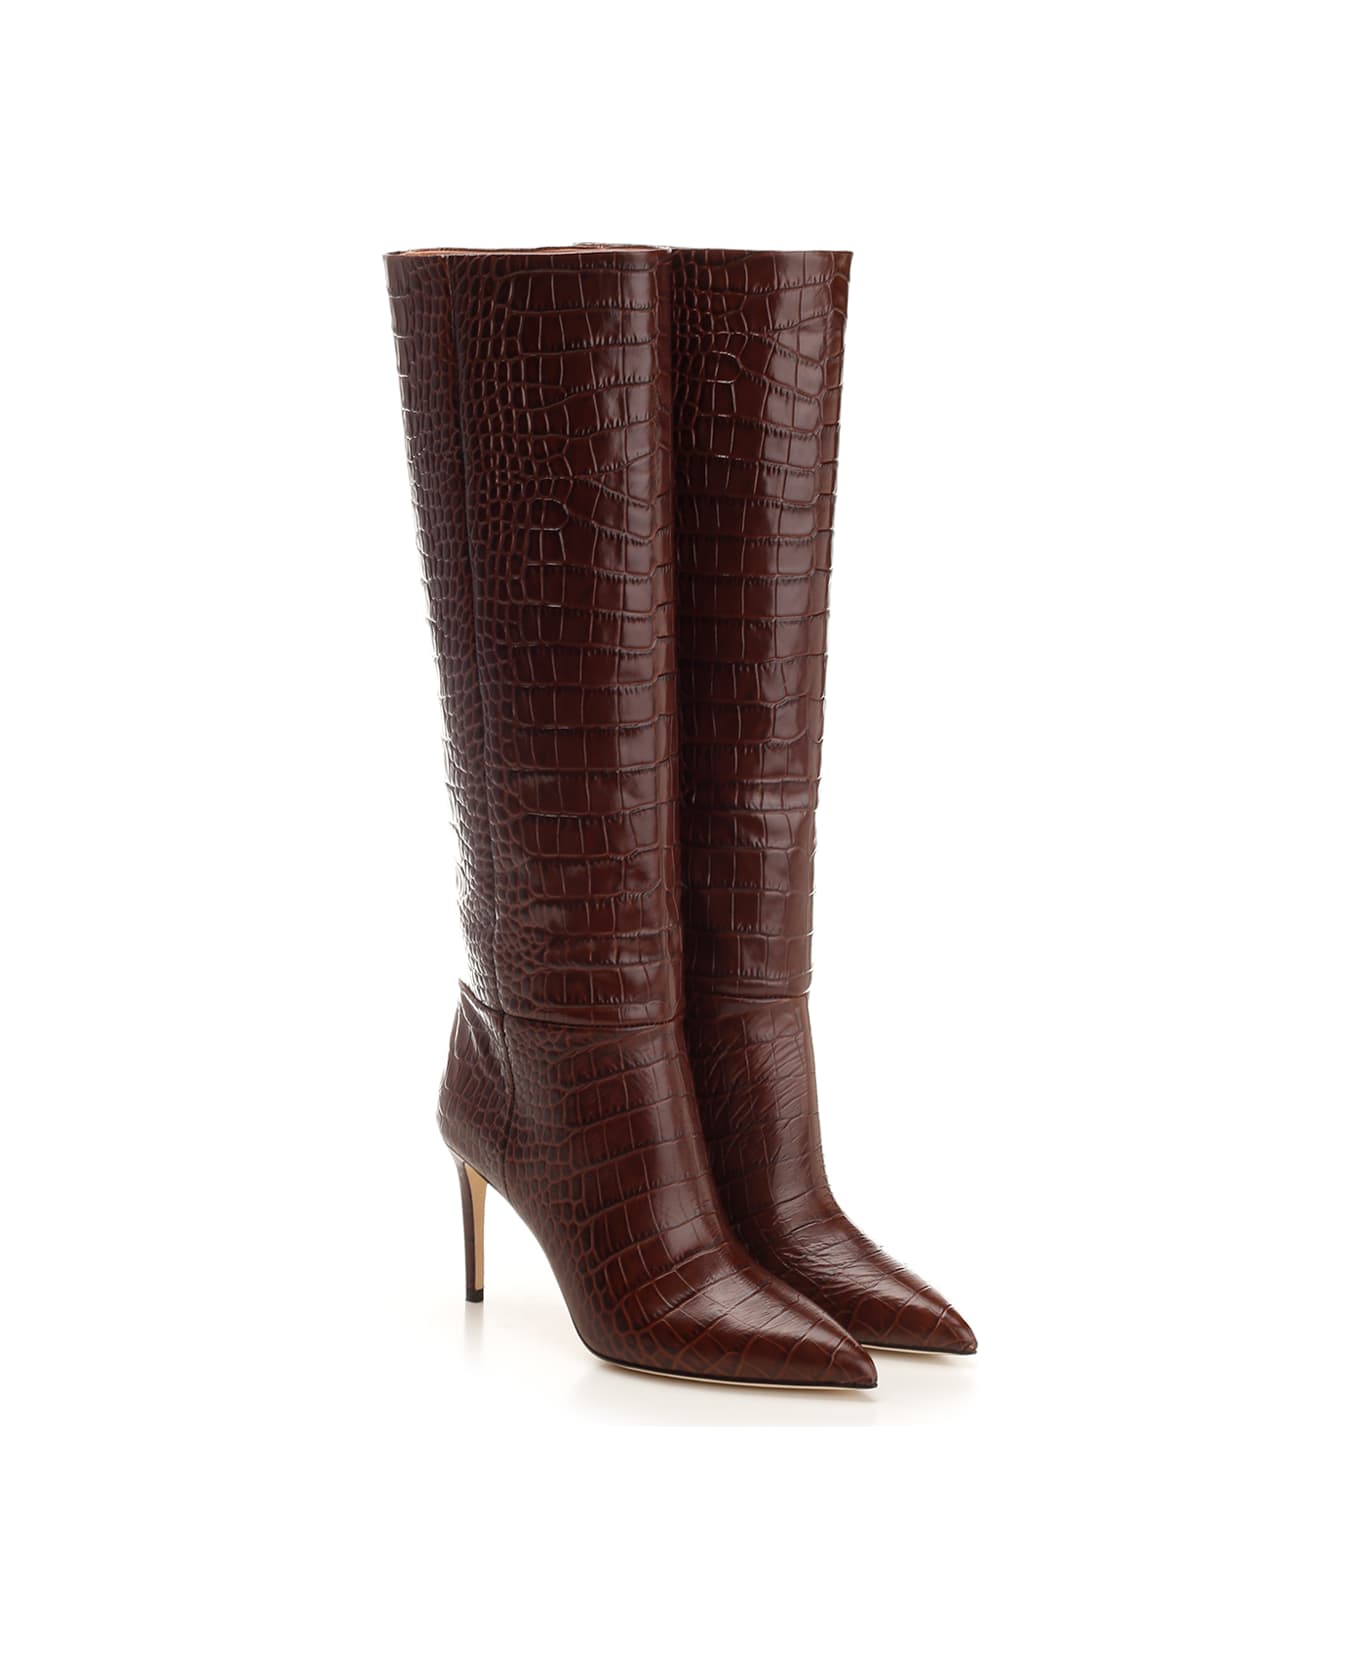 Paris Texas Embossed Leather Boots - Marrone